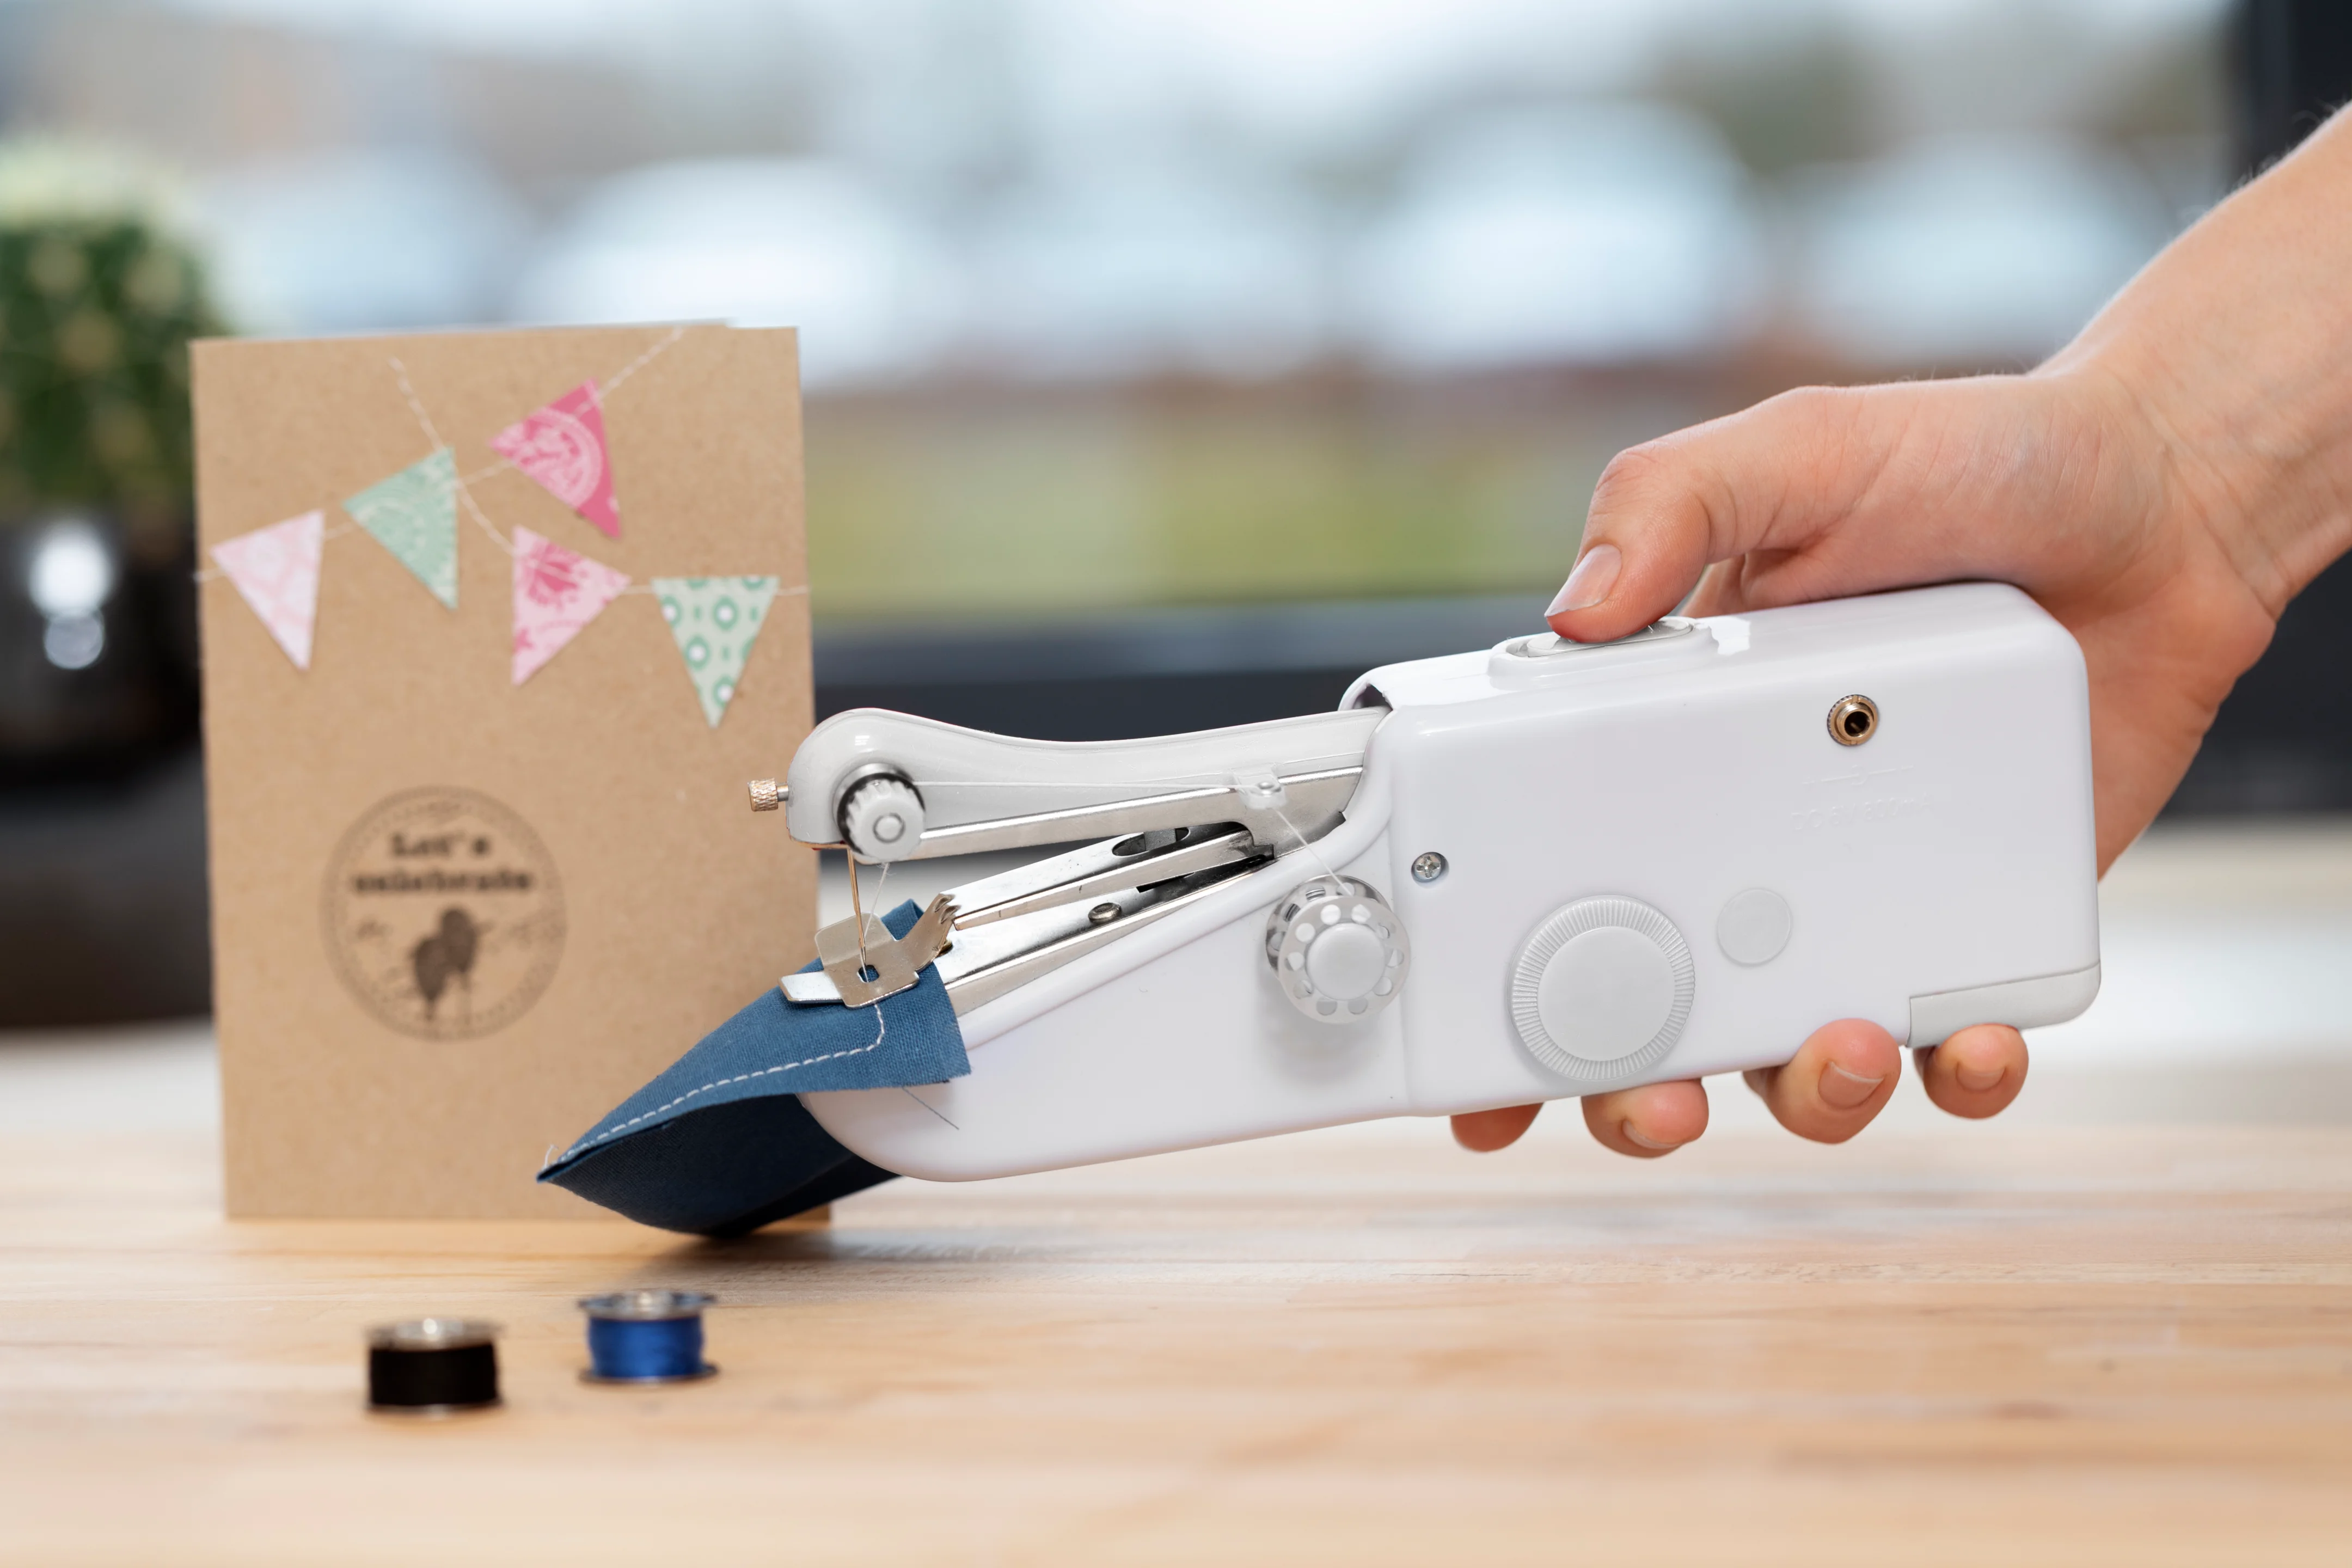 How to use a hand sewing machine (46143) on Vimeo